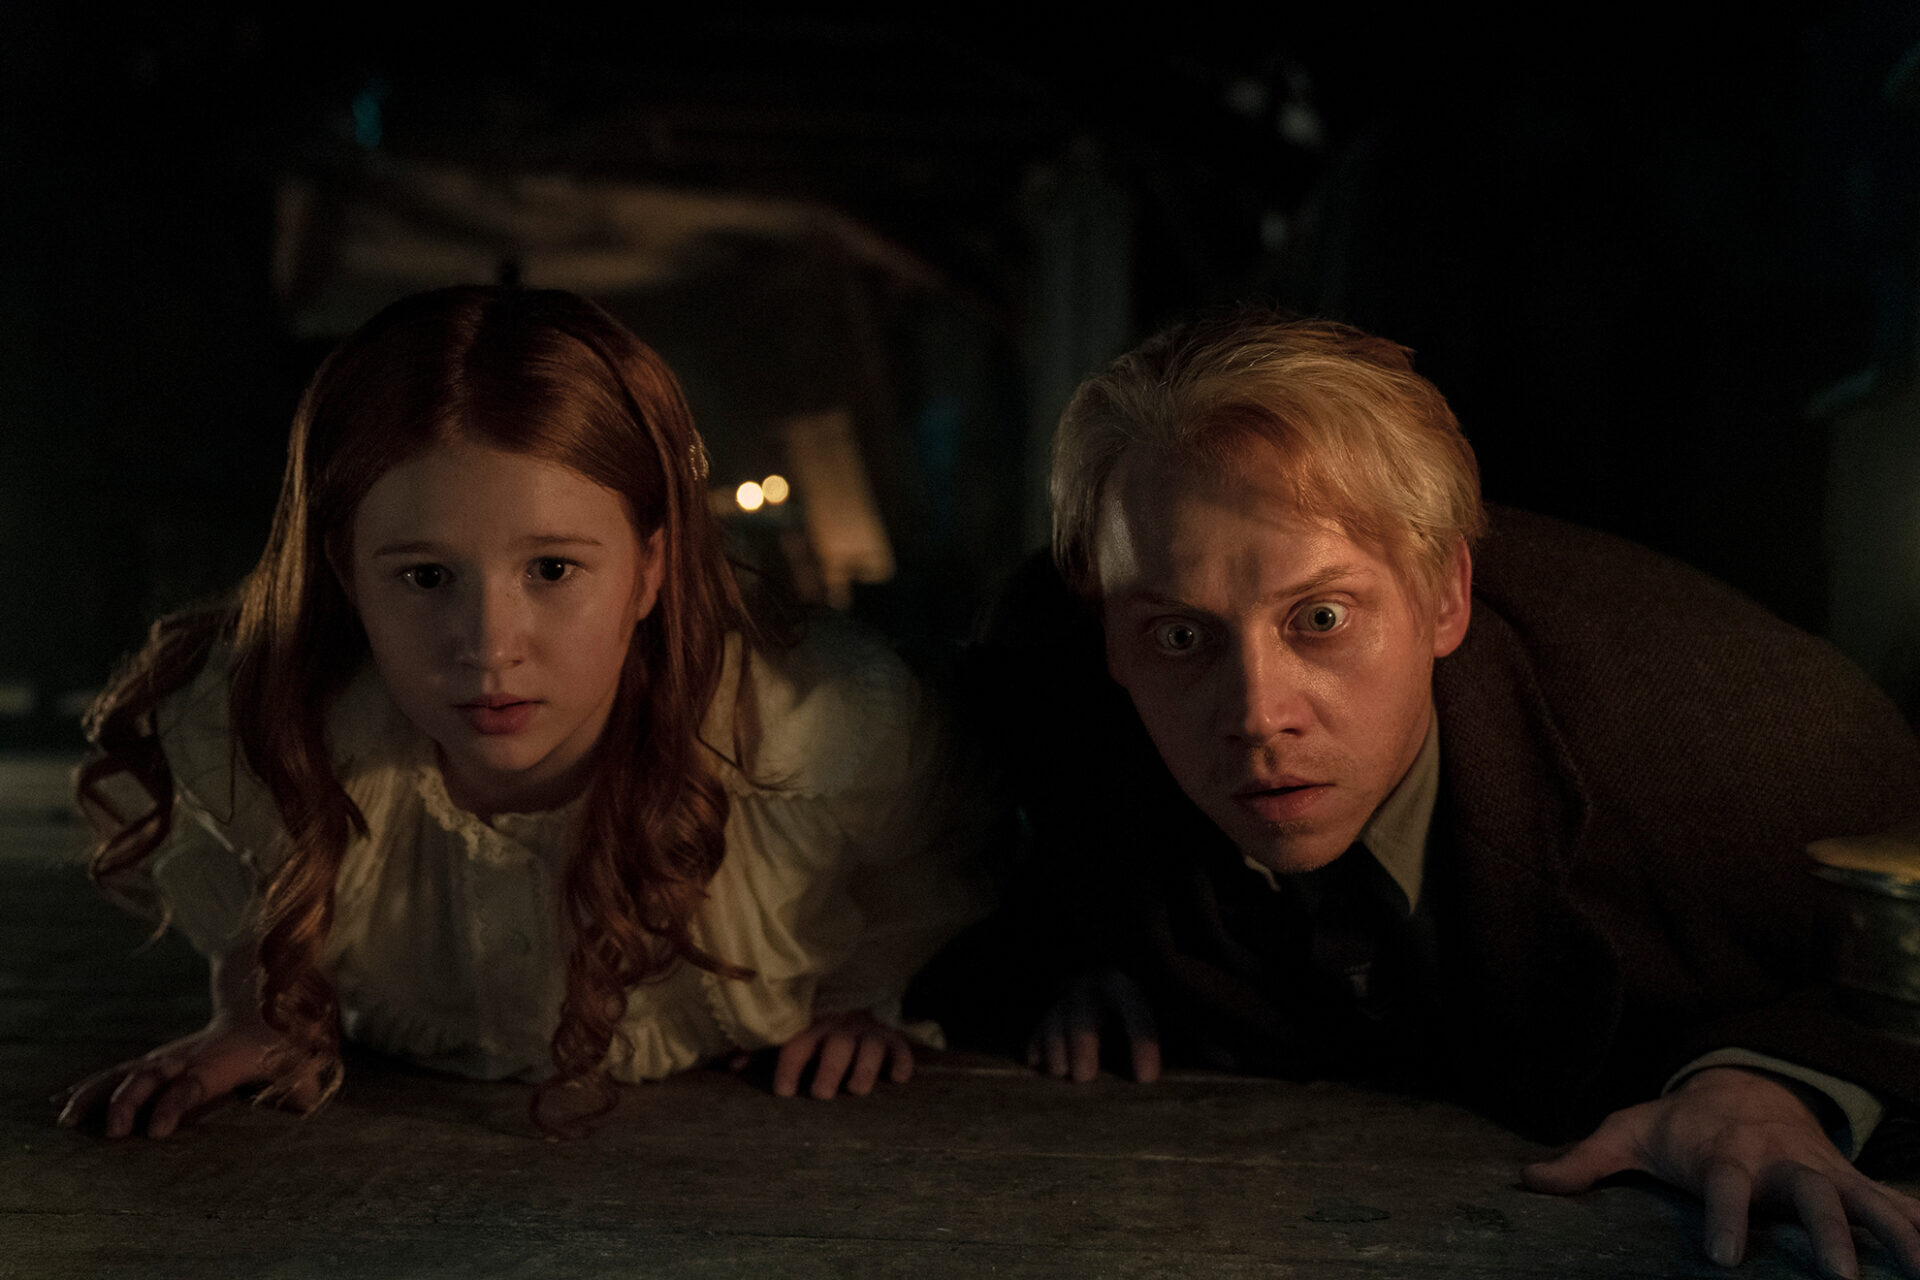 Guillermo del Toro's Cabinet of Curiosities dreams in the witch house image